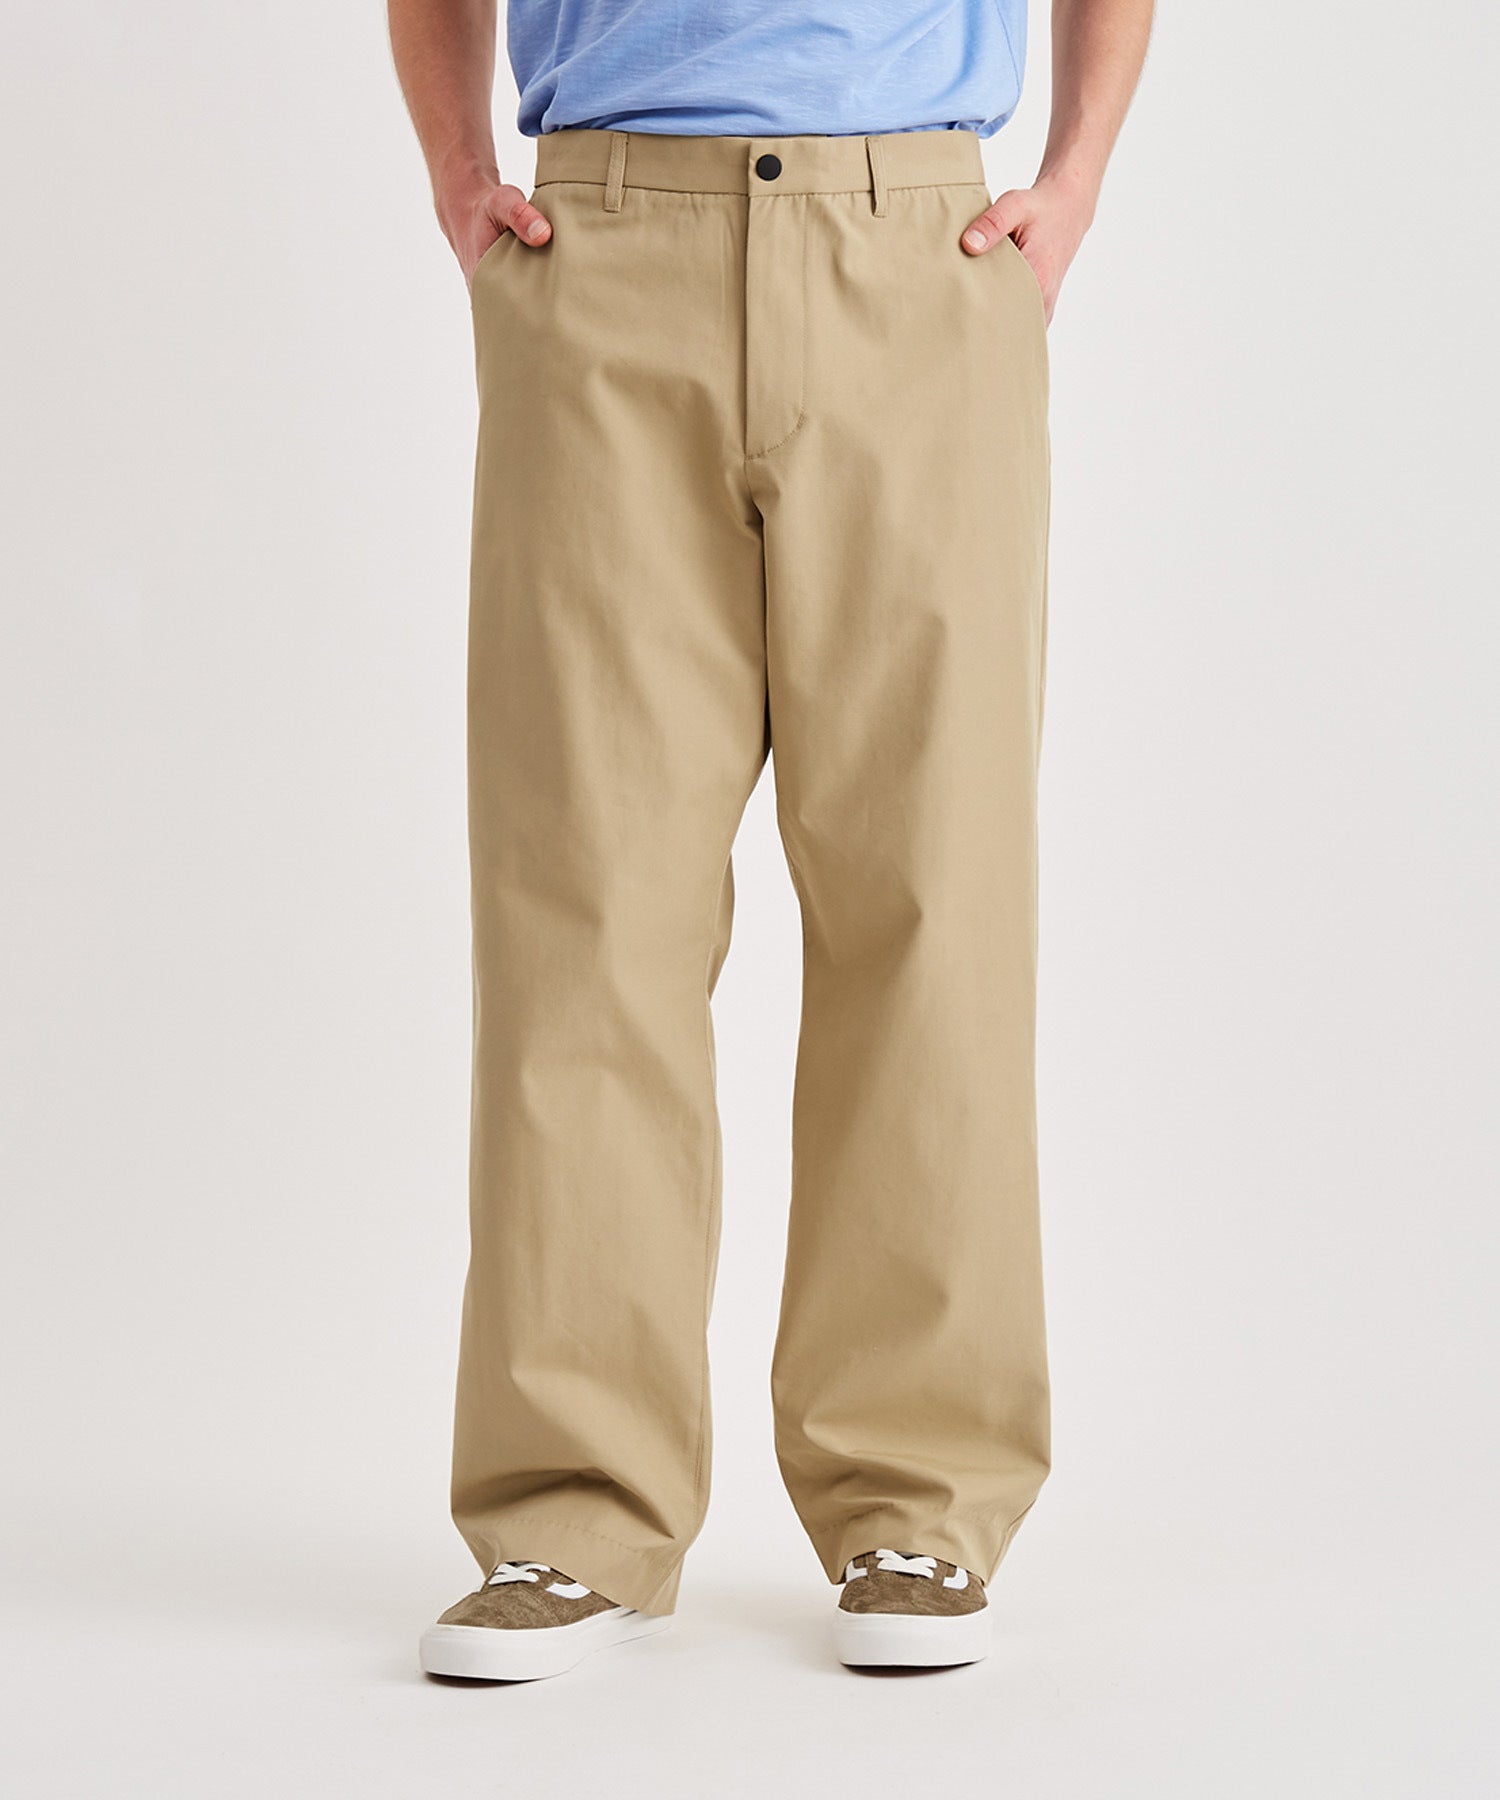 Men's Extreme Motion Twill Cargo Pant (Big & Tall)